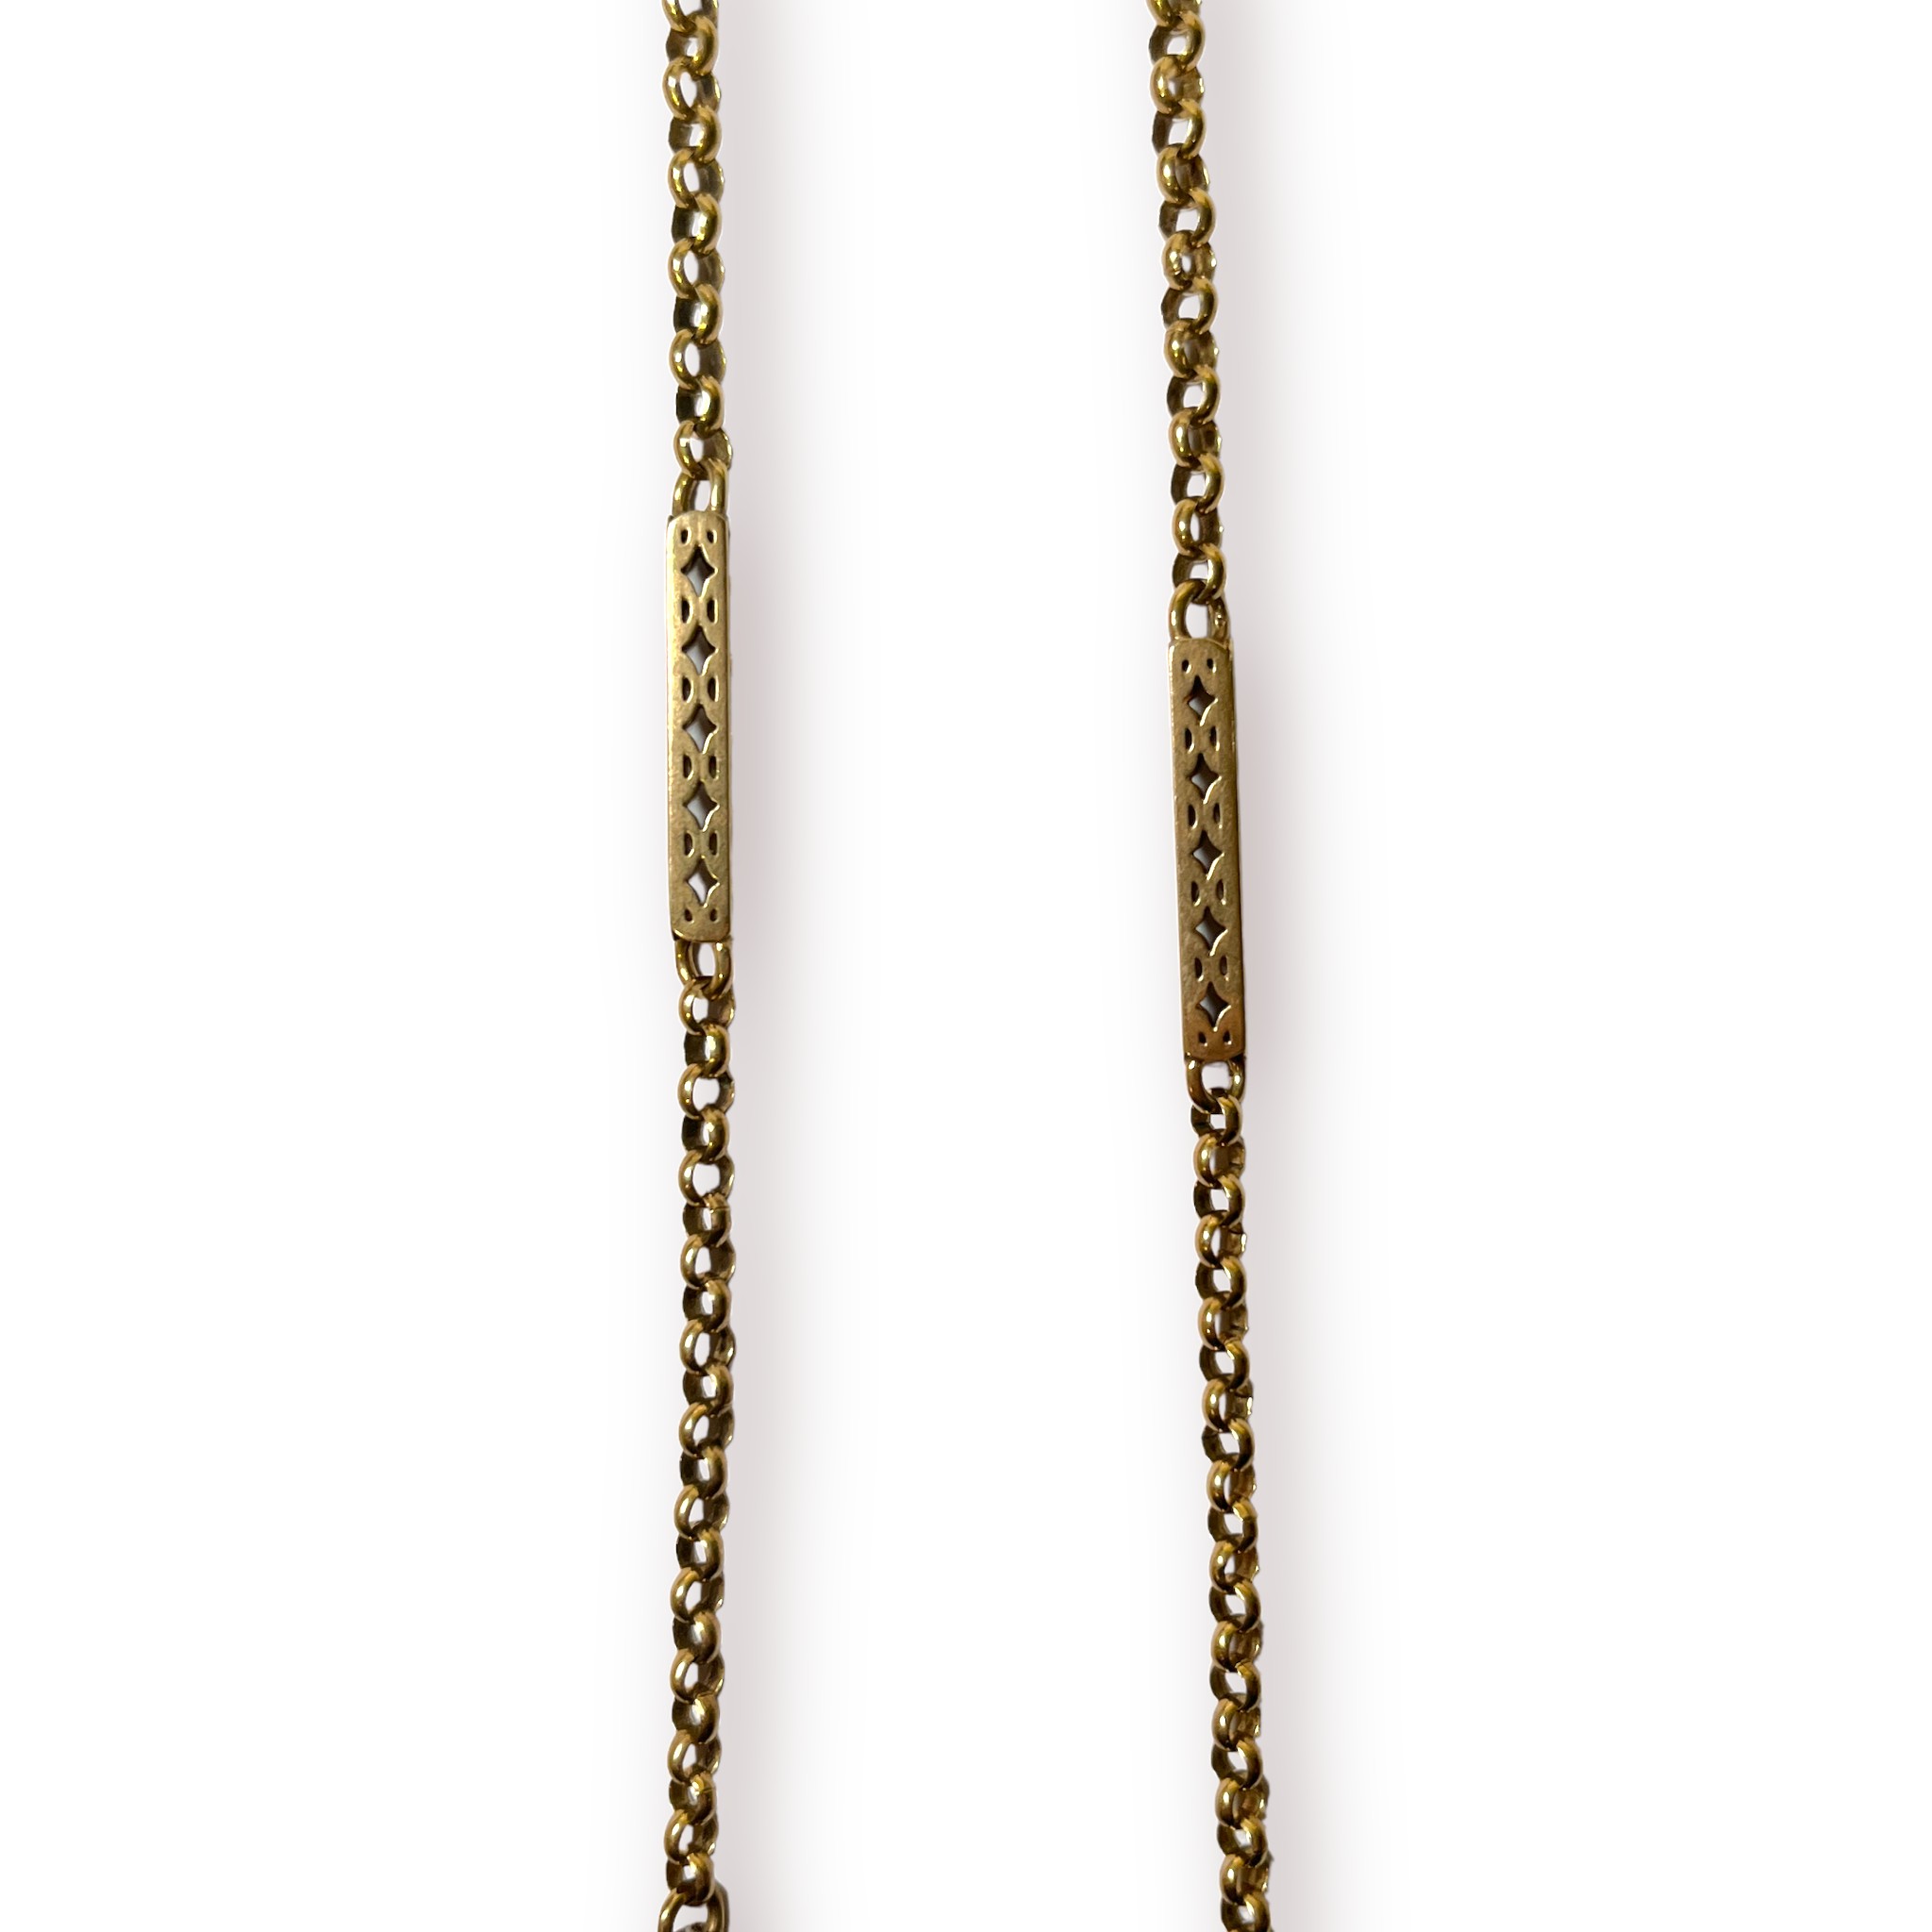 A 9ct yellow gold watch chain, with belcher and pierced elongated bar links, weighs 15.9 grams, - Image 2 of 2